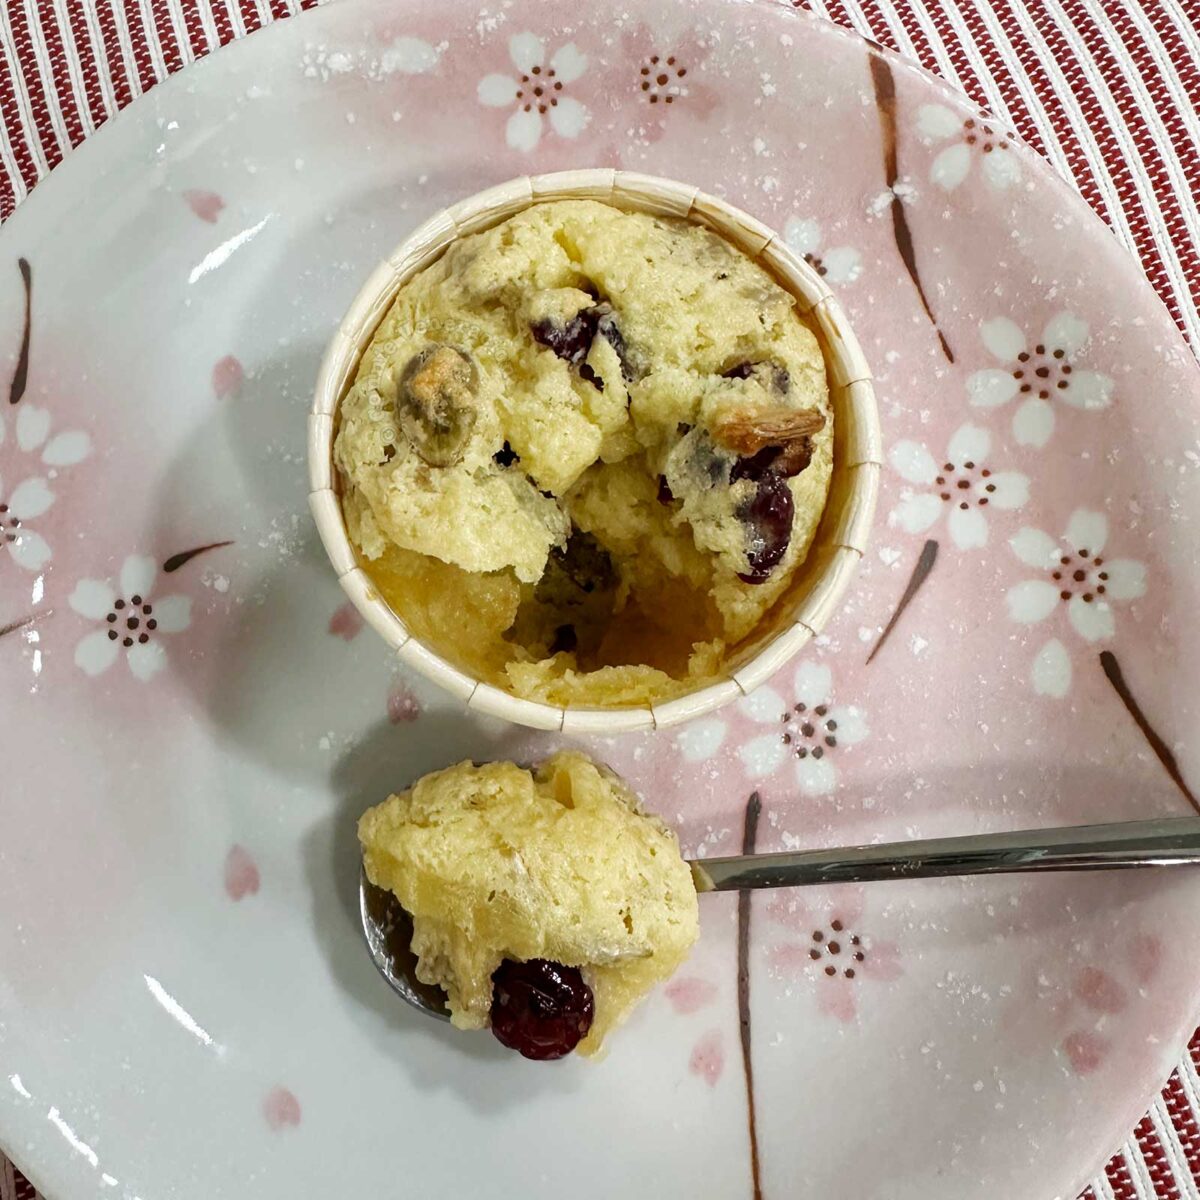 Muffin-sized milk bread pudding with cranberries, and sunflower and pumpkin seeds